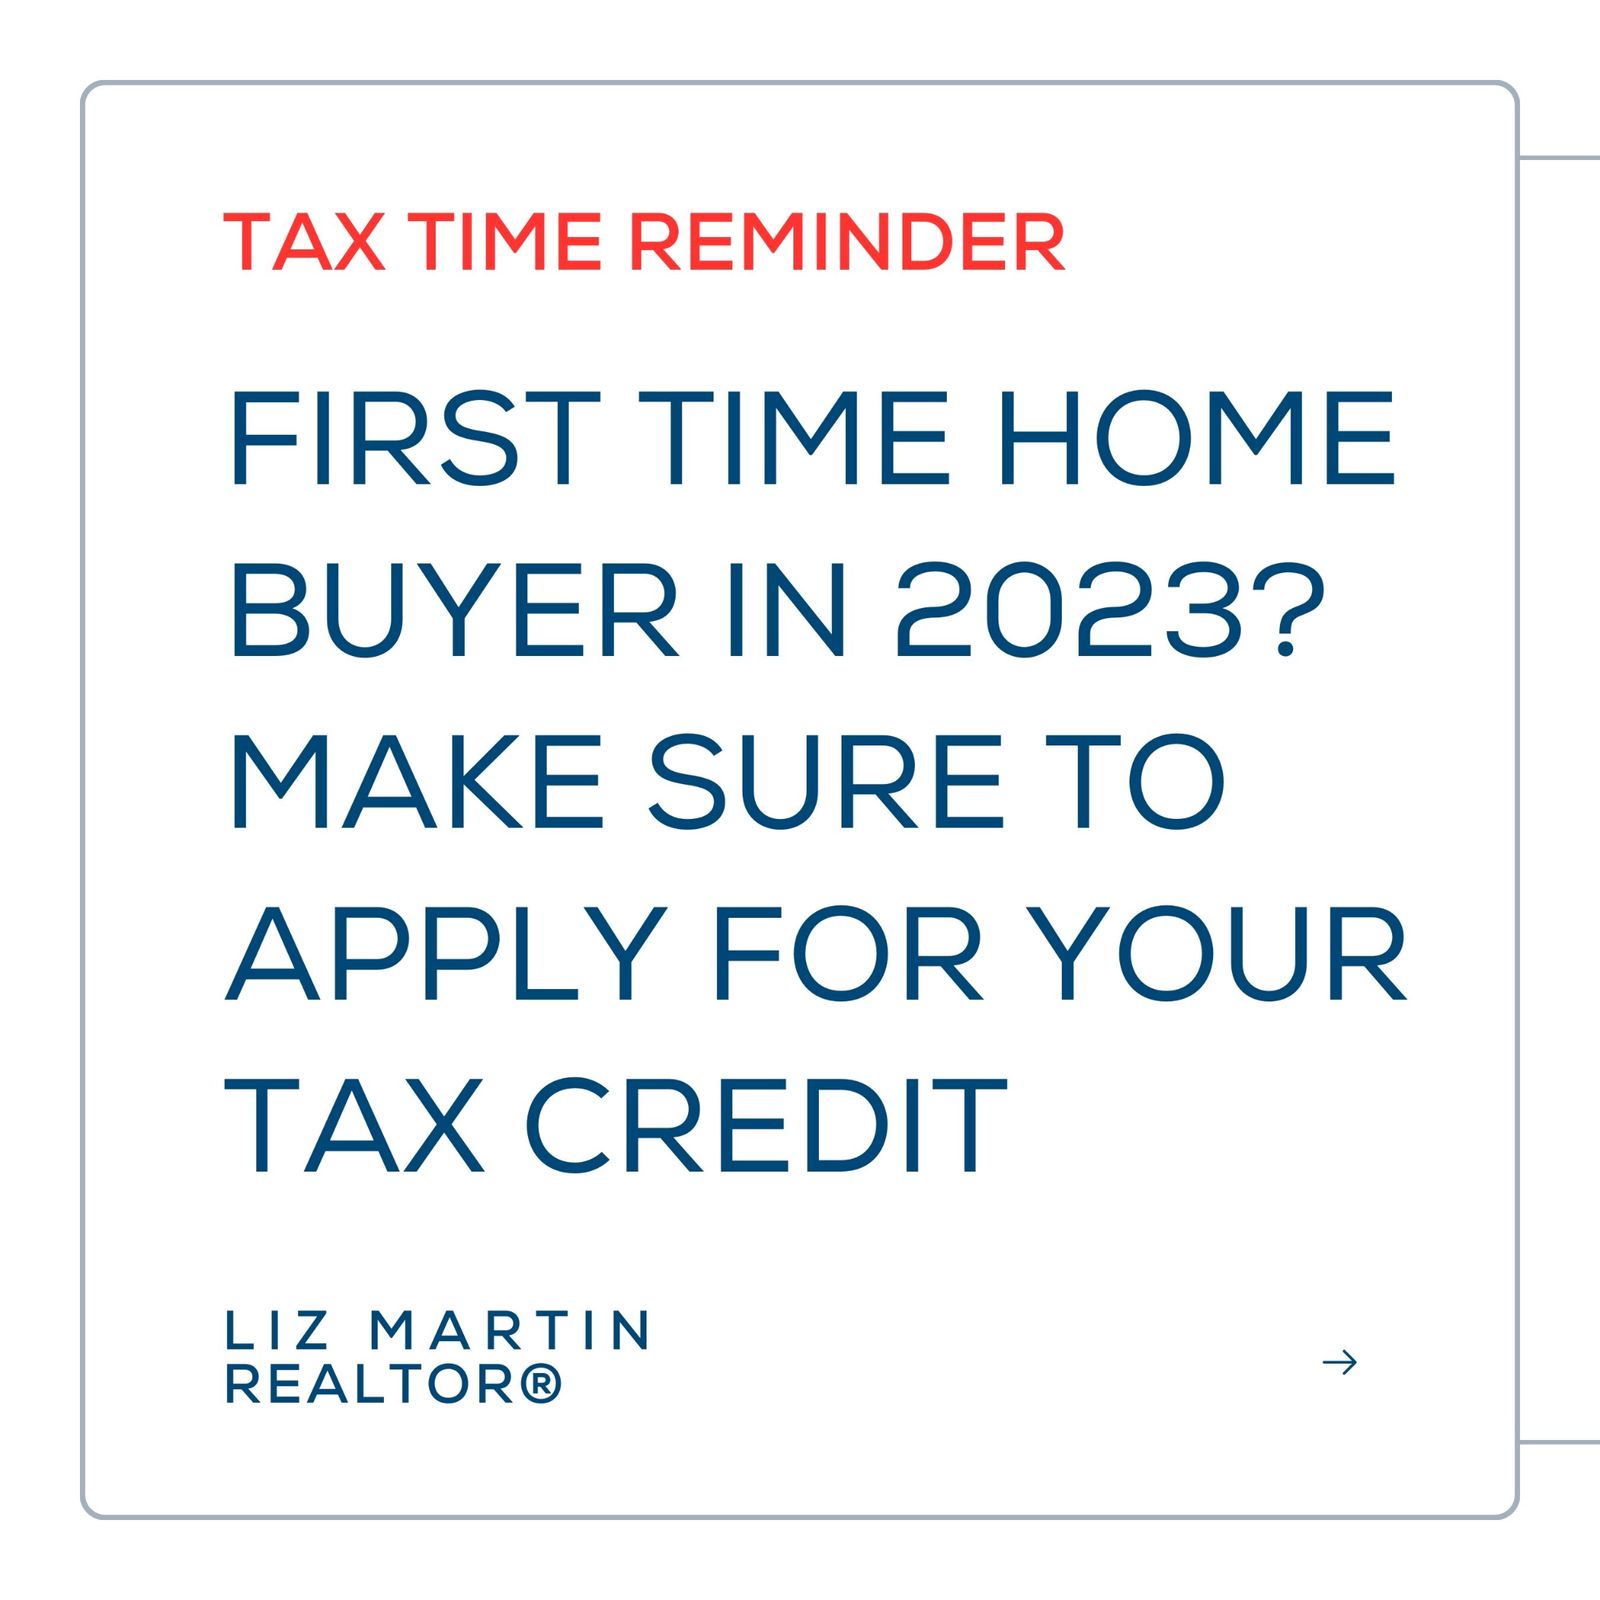 First Time Home Buyer Tax Credit - Don’t Miss Out!